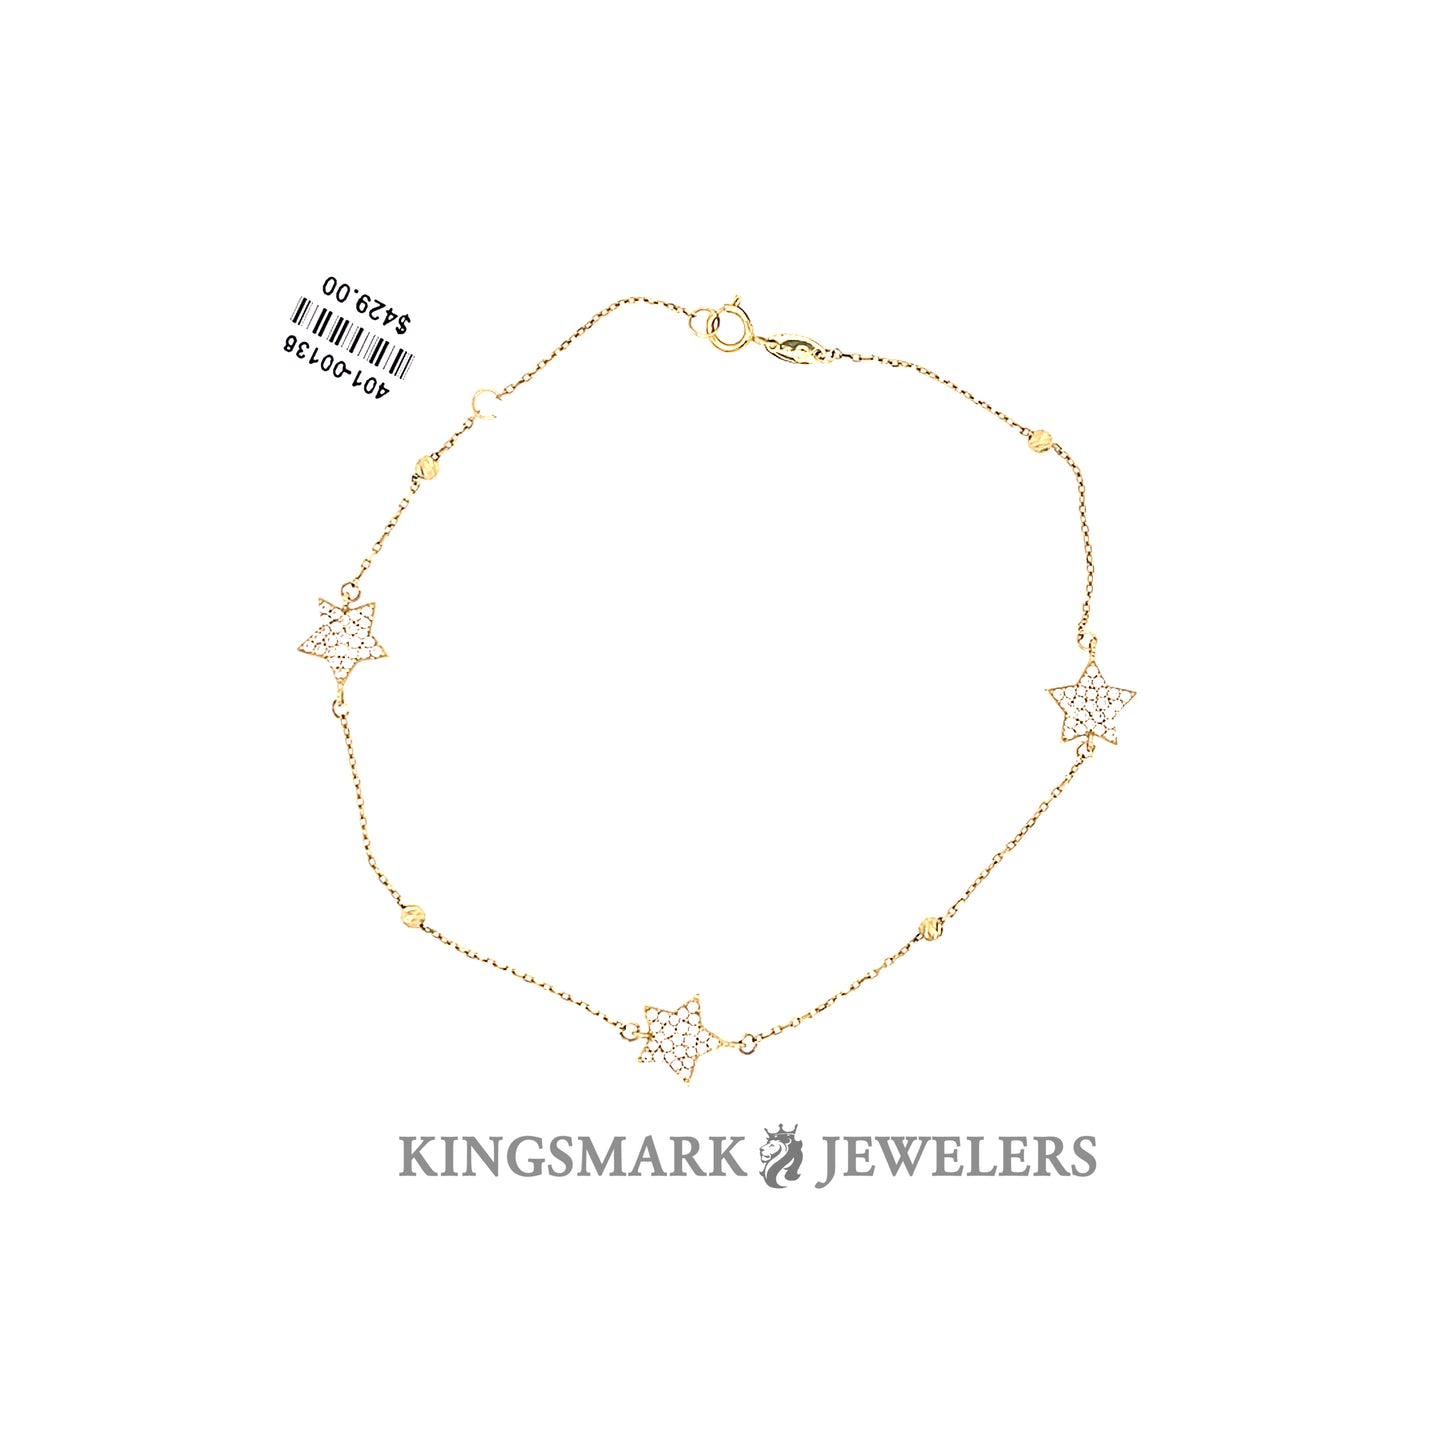 10K Yellow Gold Fancy Star Anklet